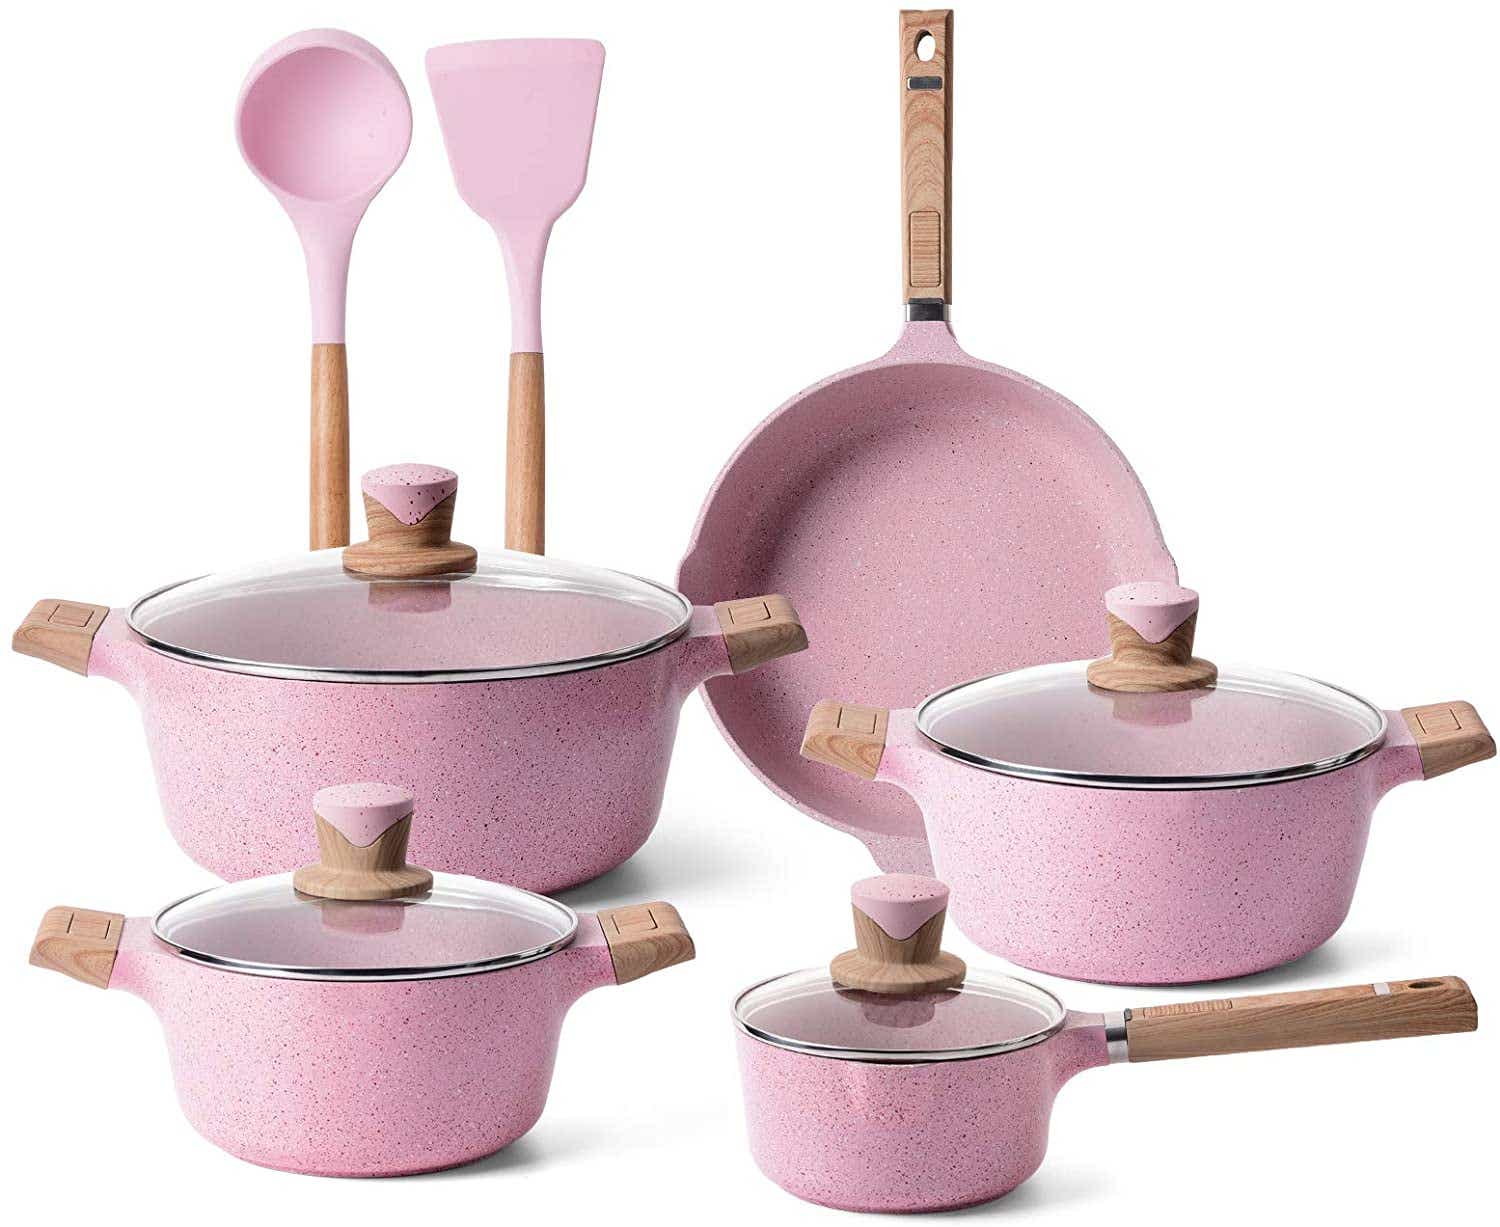 New Cookware: Pink Pots and Pans! - The Pink Dream